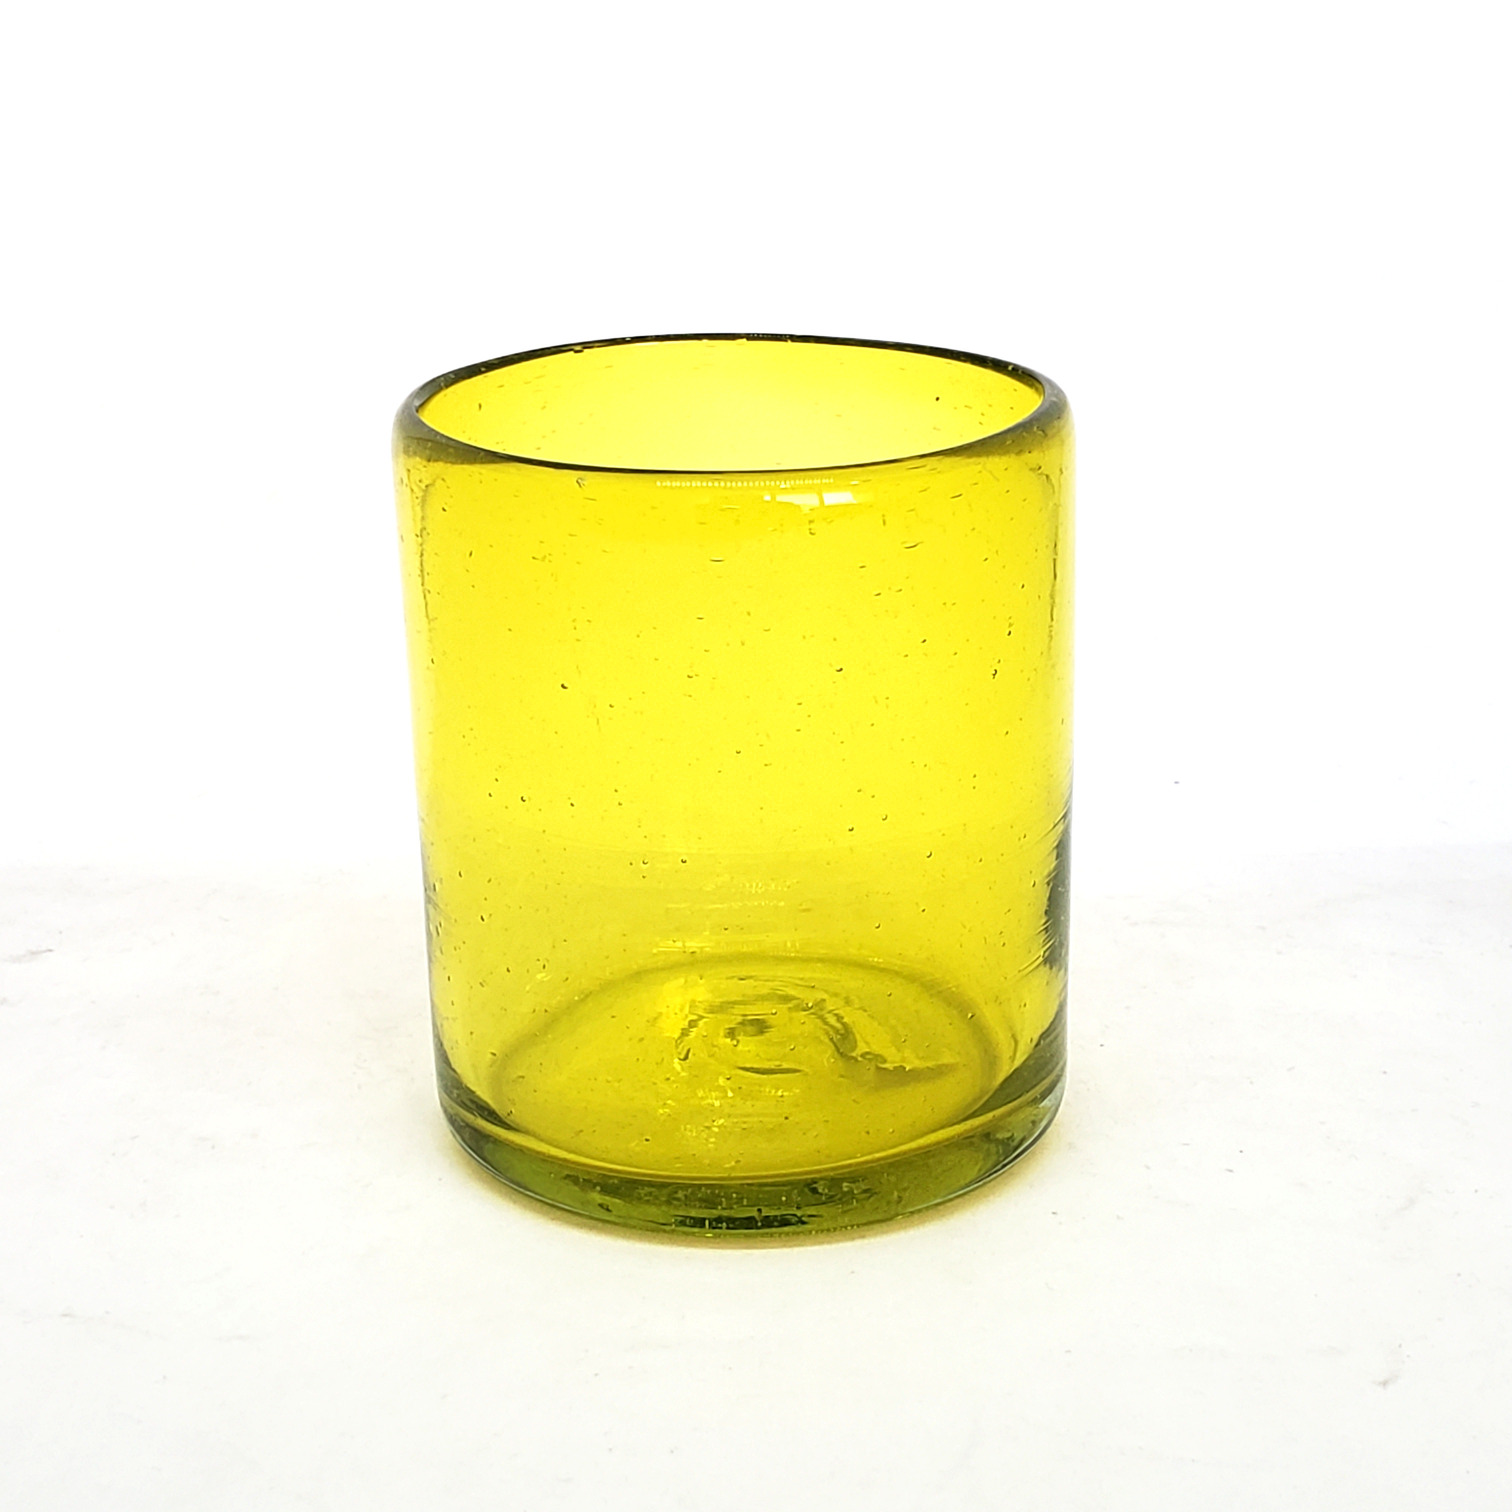 New Items / Solid Yellow 9 oz Short Tumblers  / Enhance your favorite drink with these colorful handcrafted glasses.